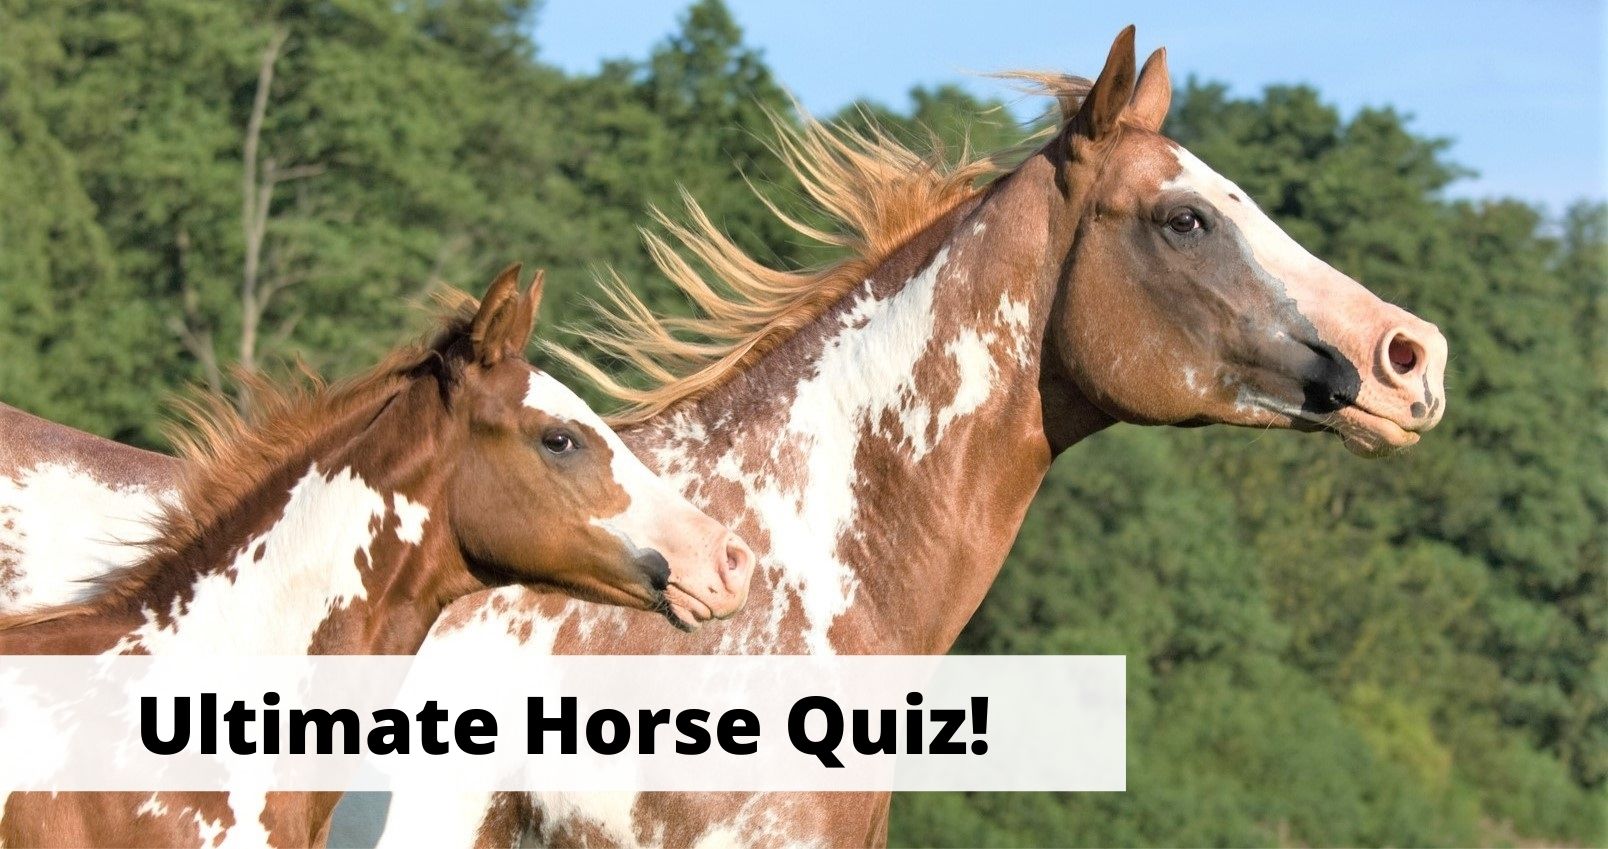 Horse Quiz: 20 General Knowledge Trivia Questions About Horses